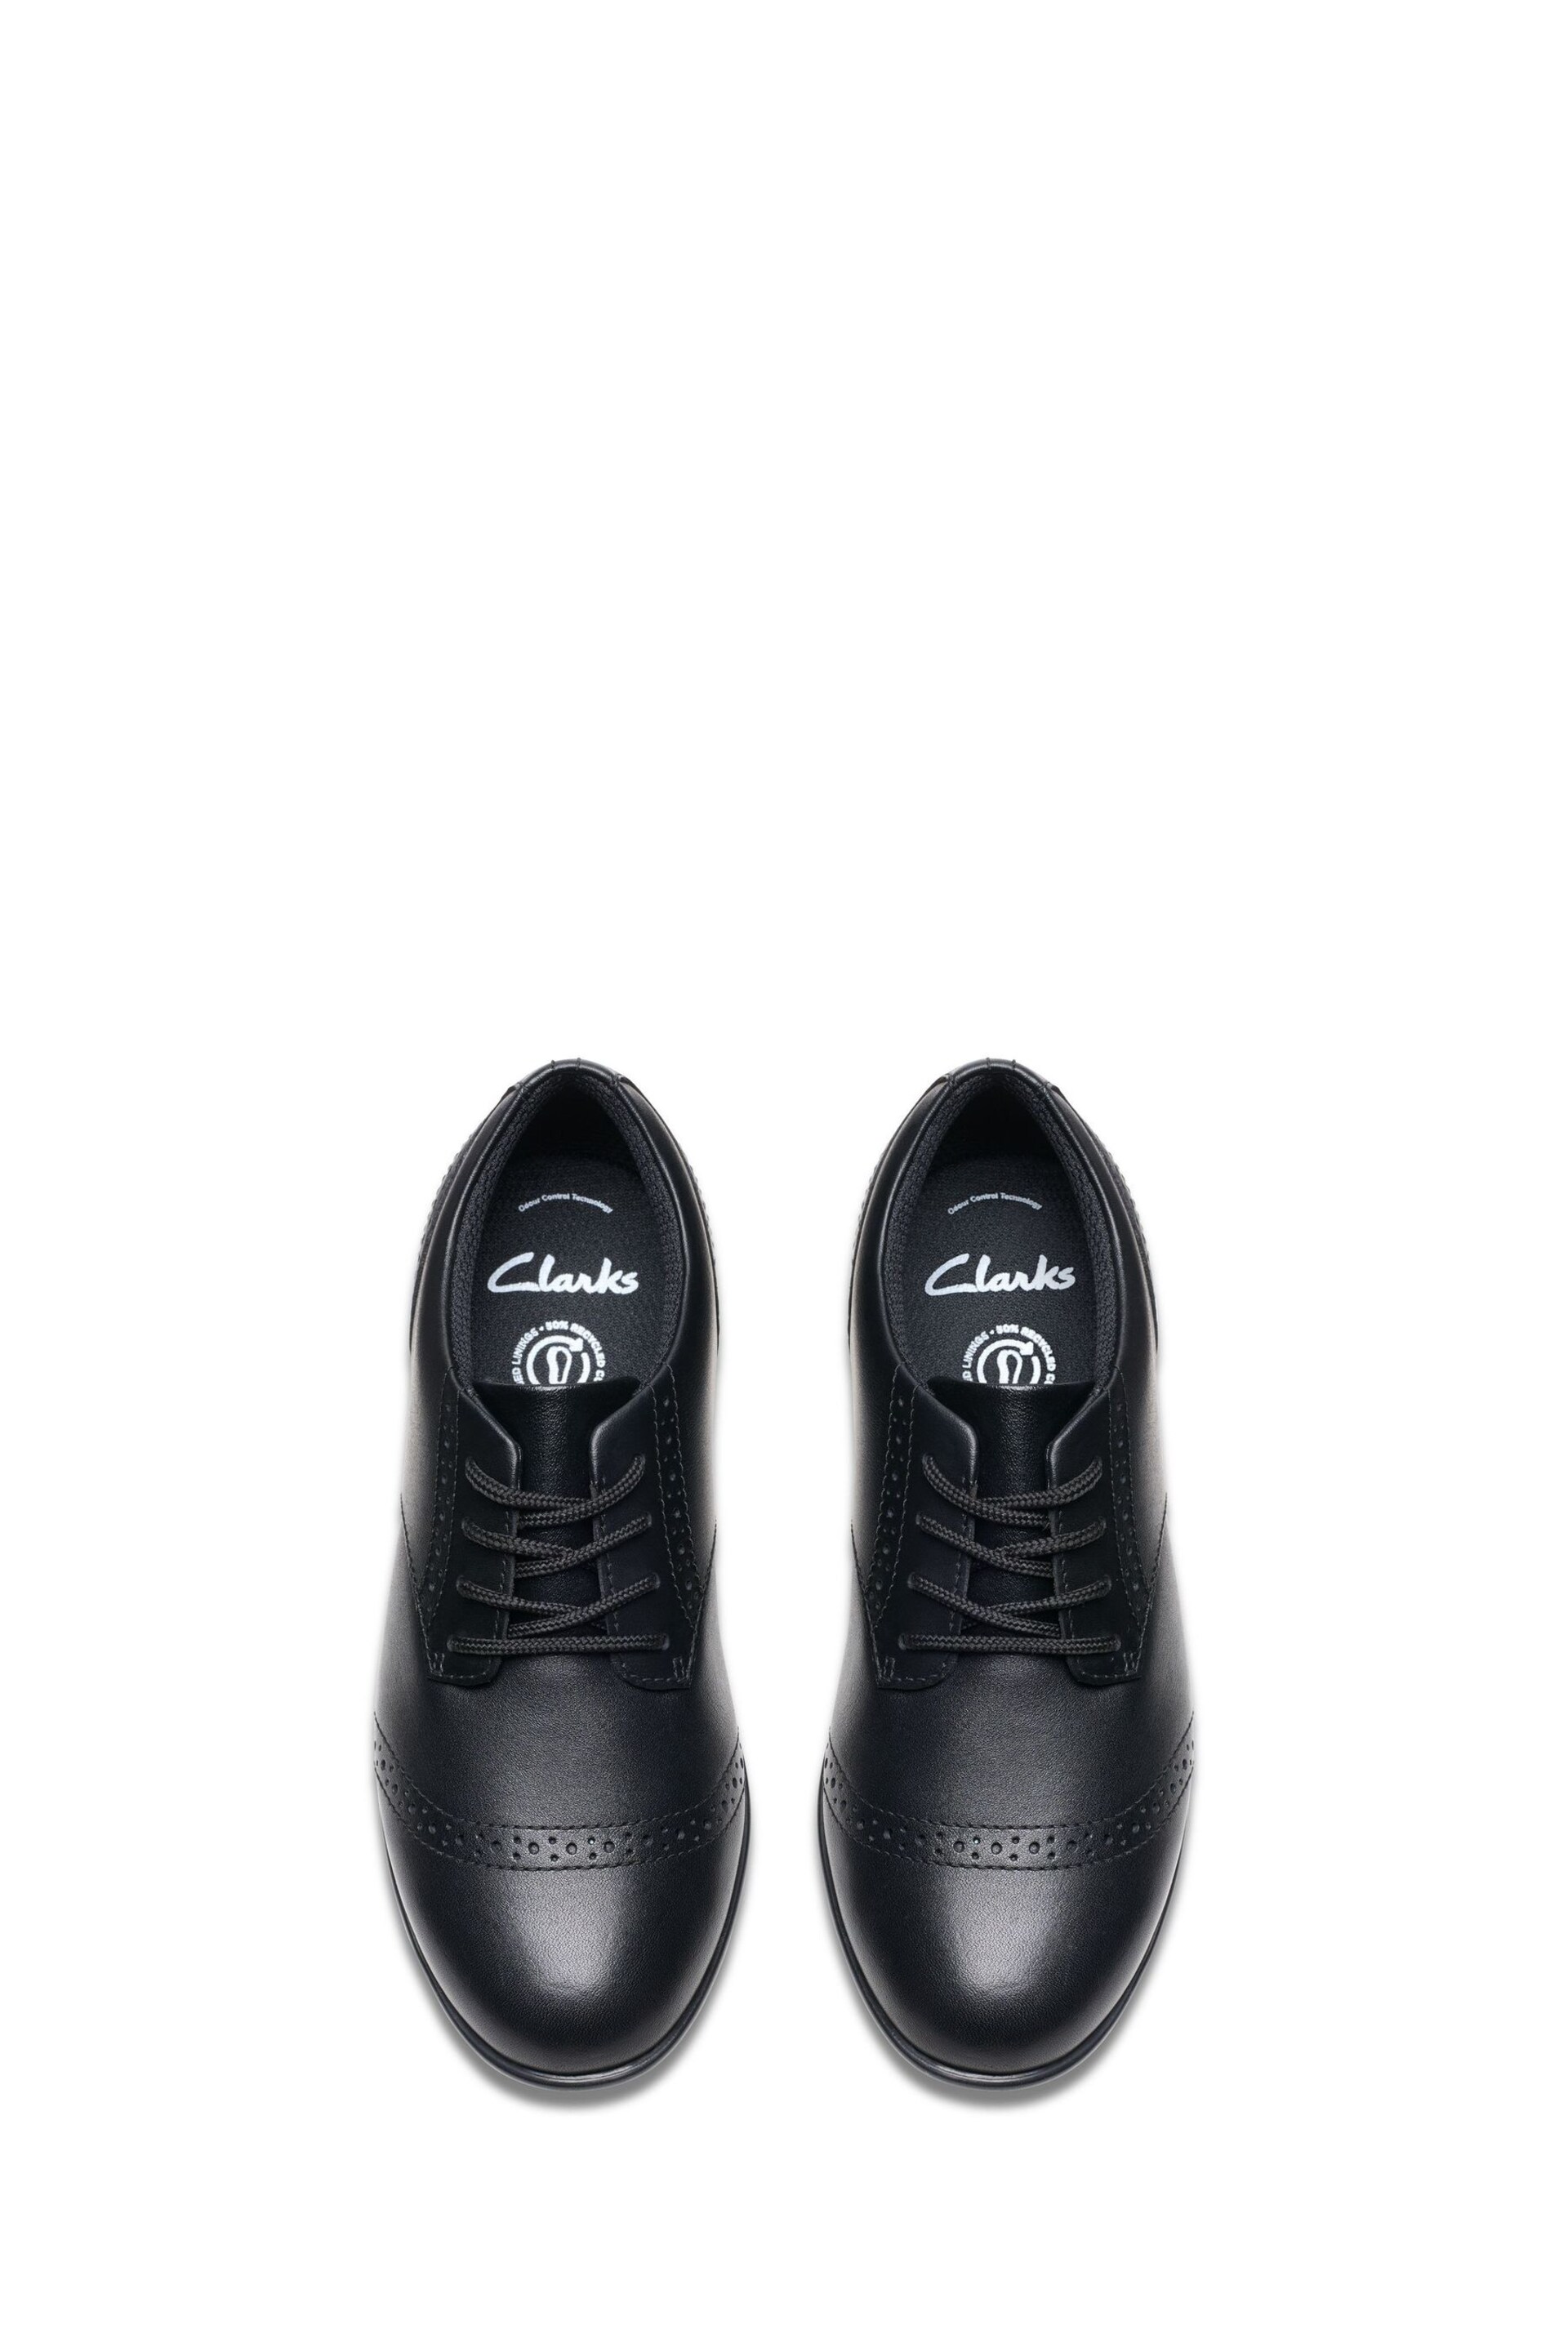 Clarks Black Leather FinjaBrogue O Shoes - Image 5 of 8